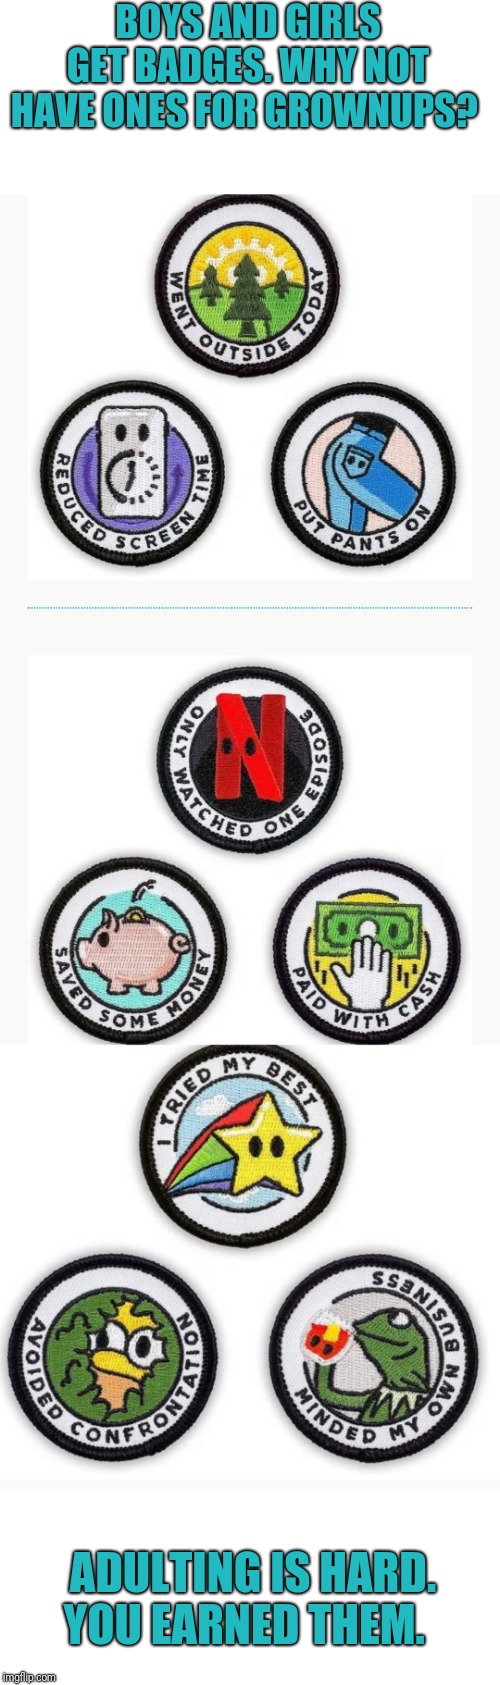 Merit badges for grownups. I've earned 3 just today! ;) |  BOYS AND GIRLS GET BADGES. WHY NOT HAVE ONES FOR GROWNUPS? ADULTING IS HARD. YOU EARNED THEM. | image tagged in adulting,boy scouts,girl scouts,right in the childhood | made w/ Imgflip meme maker